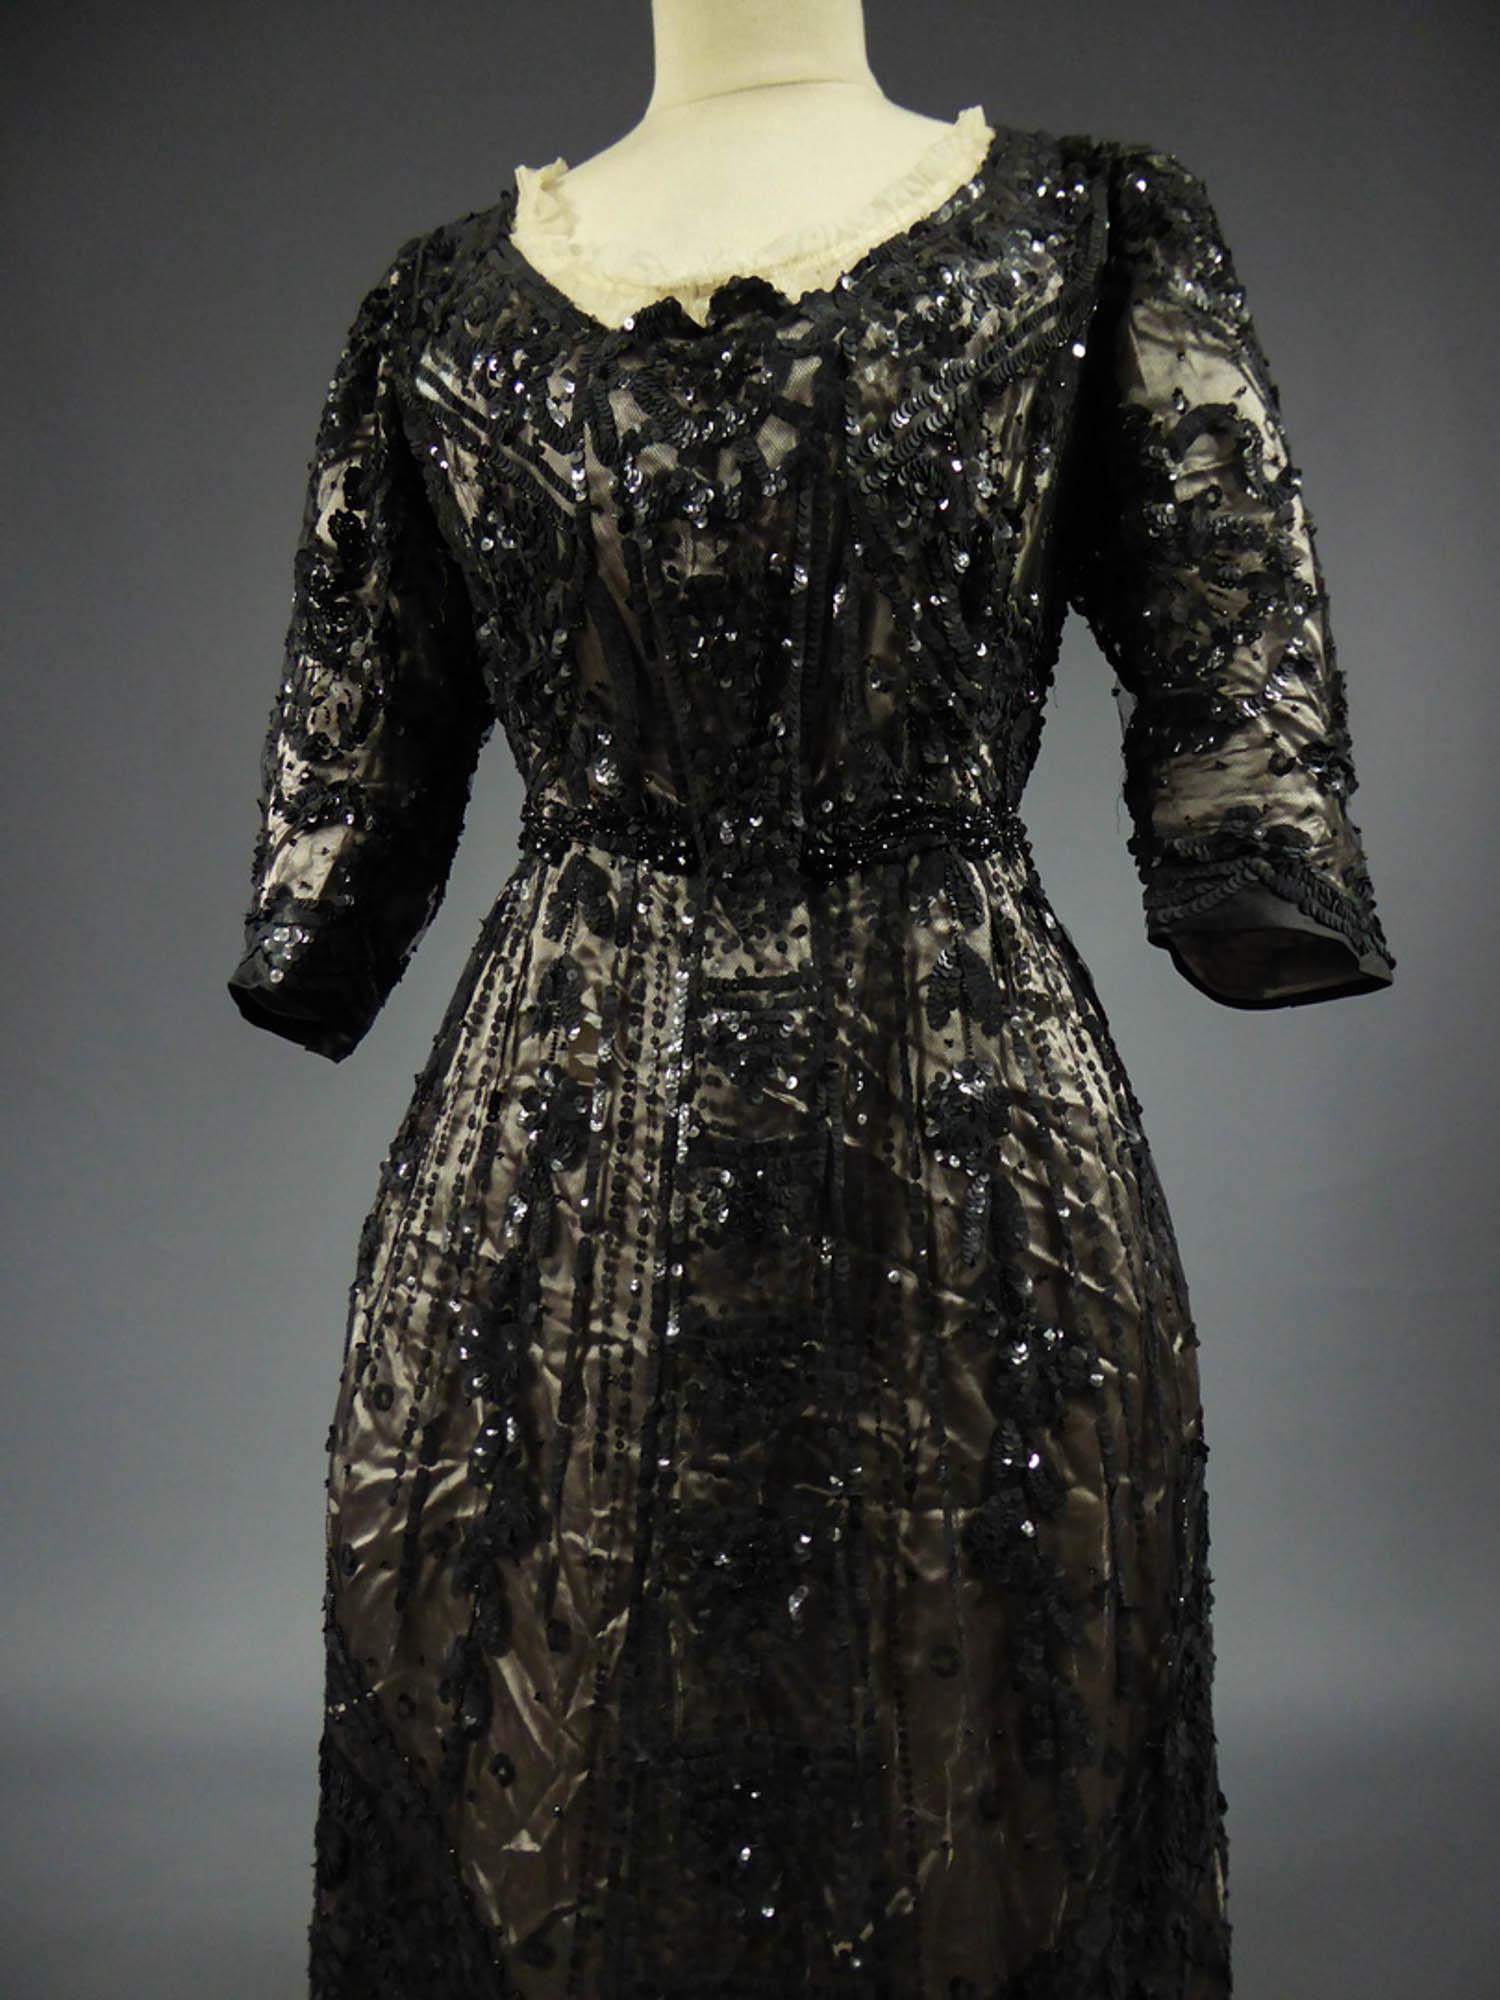 Circa 1900
France

Beautiful reception dress with train, probably Haute Couture, entirely embroidered with jet pearls and sequins on black tulle dating from the Belle Epoque. High waist dress with small pouff and large bow on the kidneys enhancing a